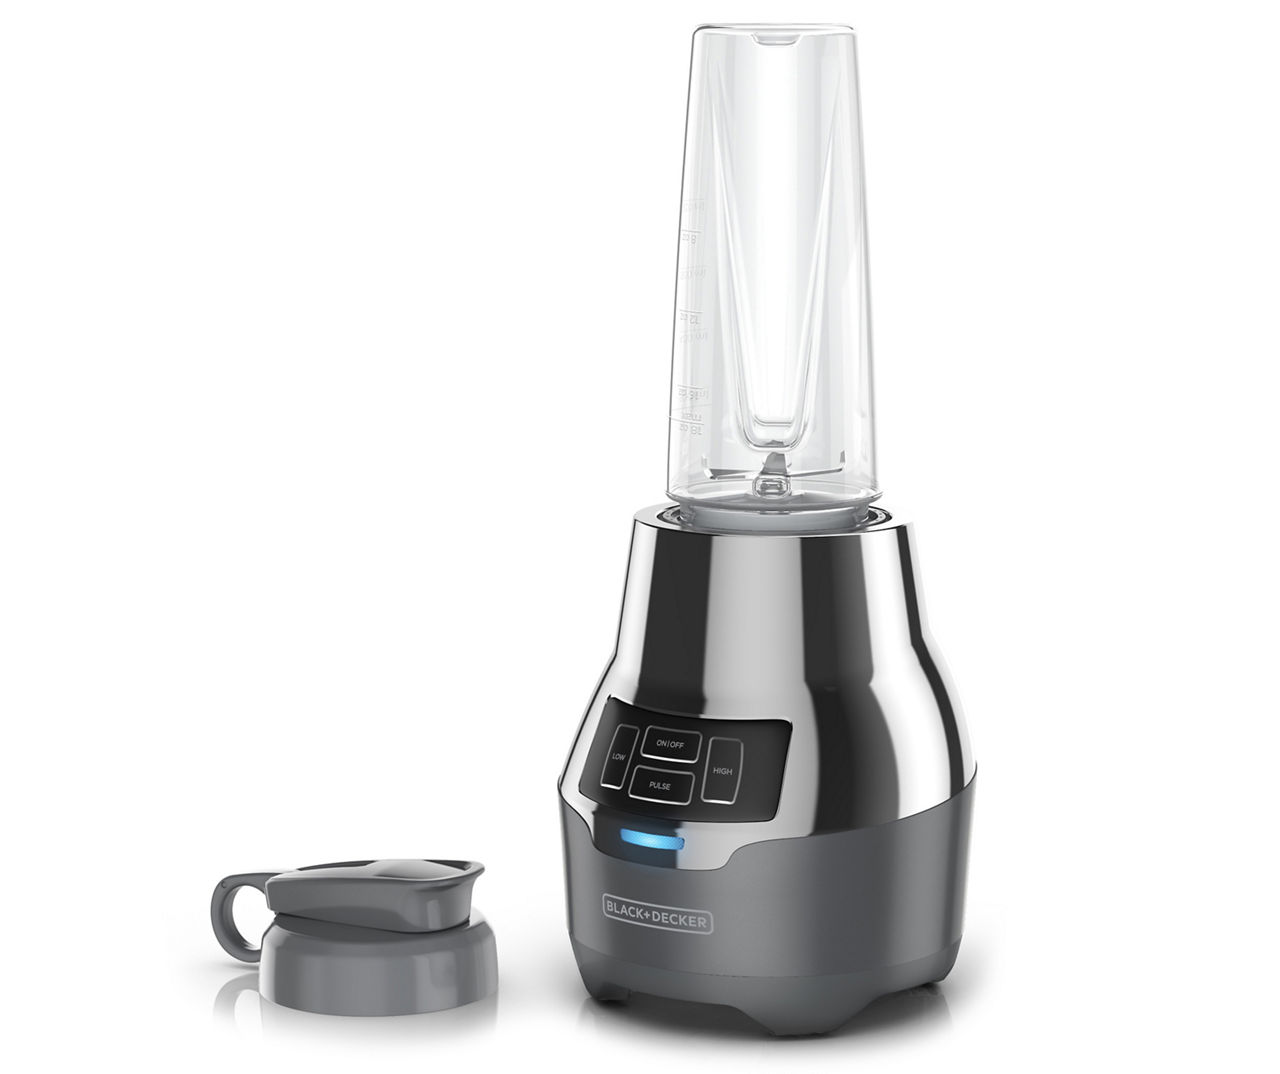 BLACK+DECKER Appliances - A quiet morning is something to savor. Now you  can enjoy the solitude alongside a delicious smoothie, thanks to the  BLACK+DECKER™ Quiet Blender! Shop Now